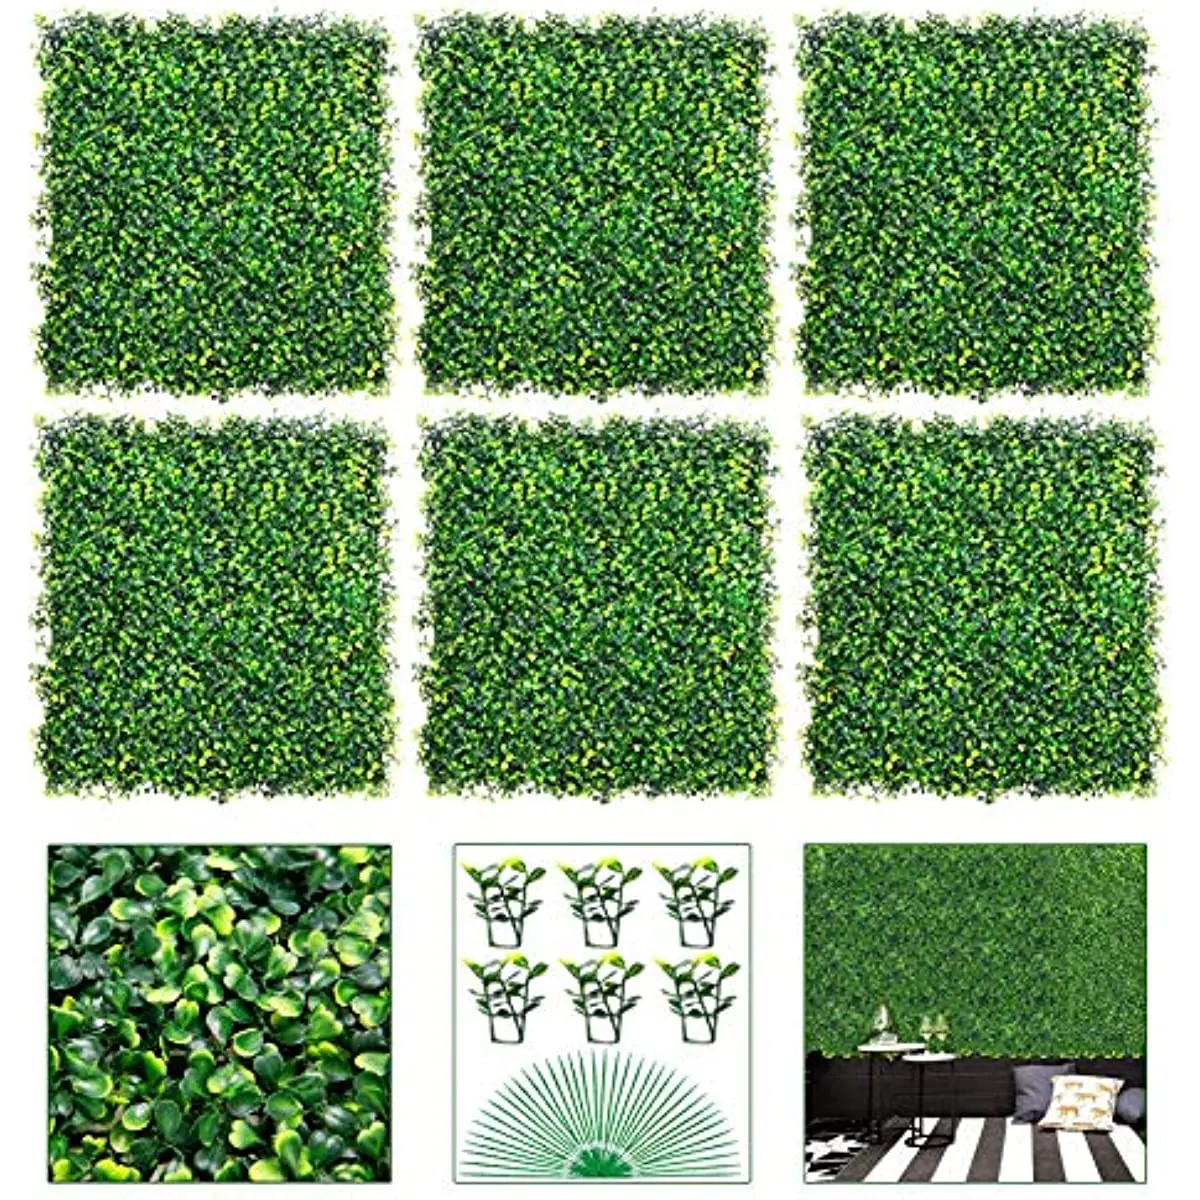 

10pcs Artificial Plant Grass Boxwood Wall Panels Hedge 25x25cm Home Decor Fake Plants Grass Backdrop Privacy Hedge Screen